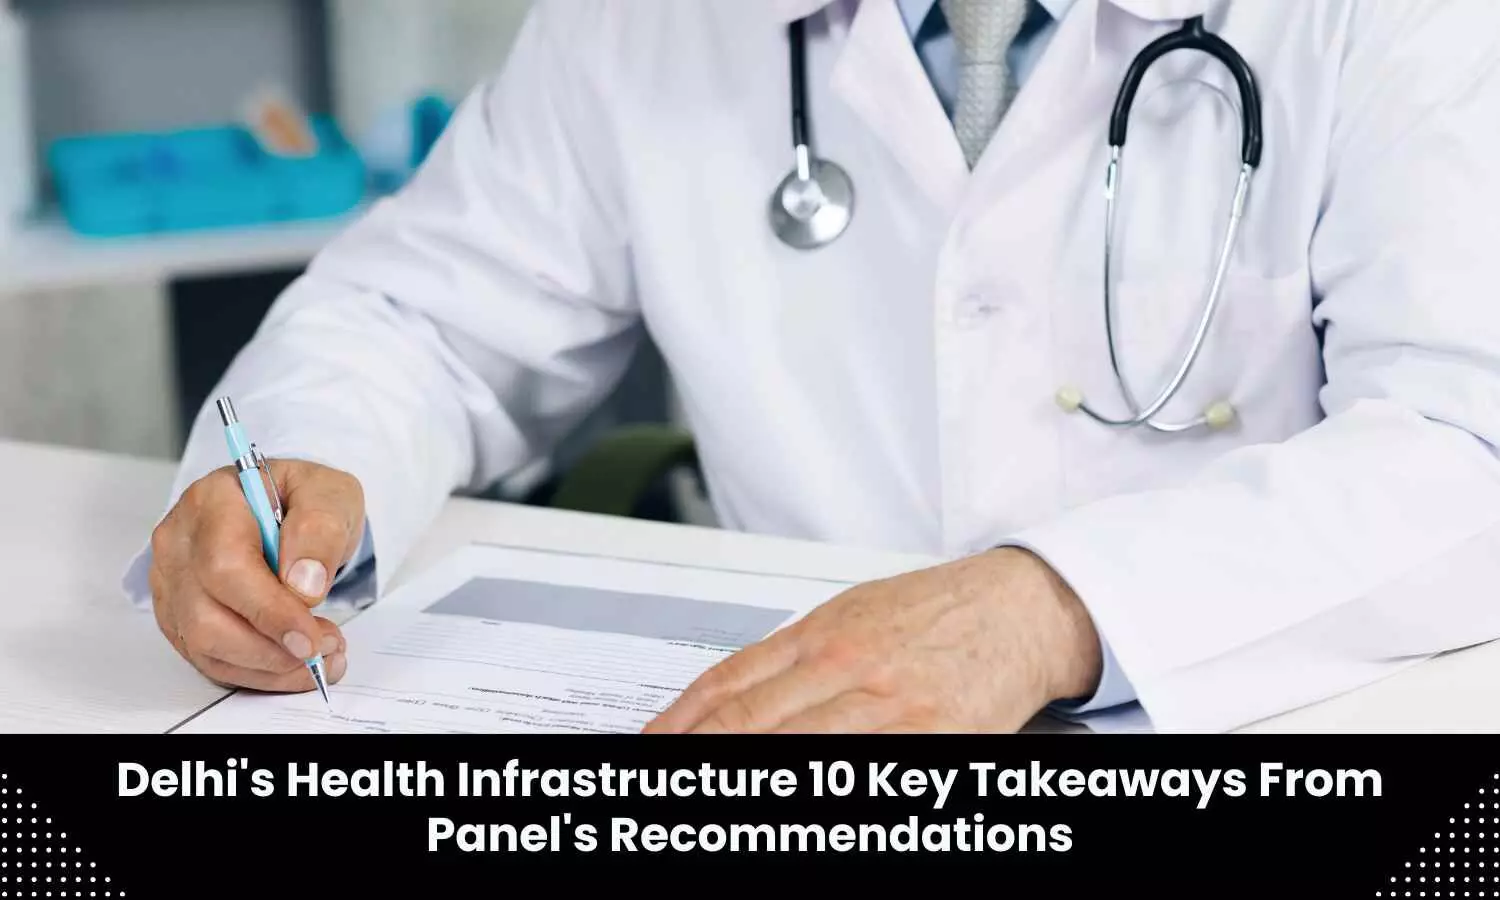 Delhi Health Infrastructure: Key takeaways from Panel recommendations